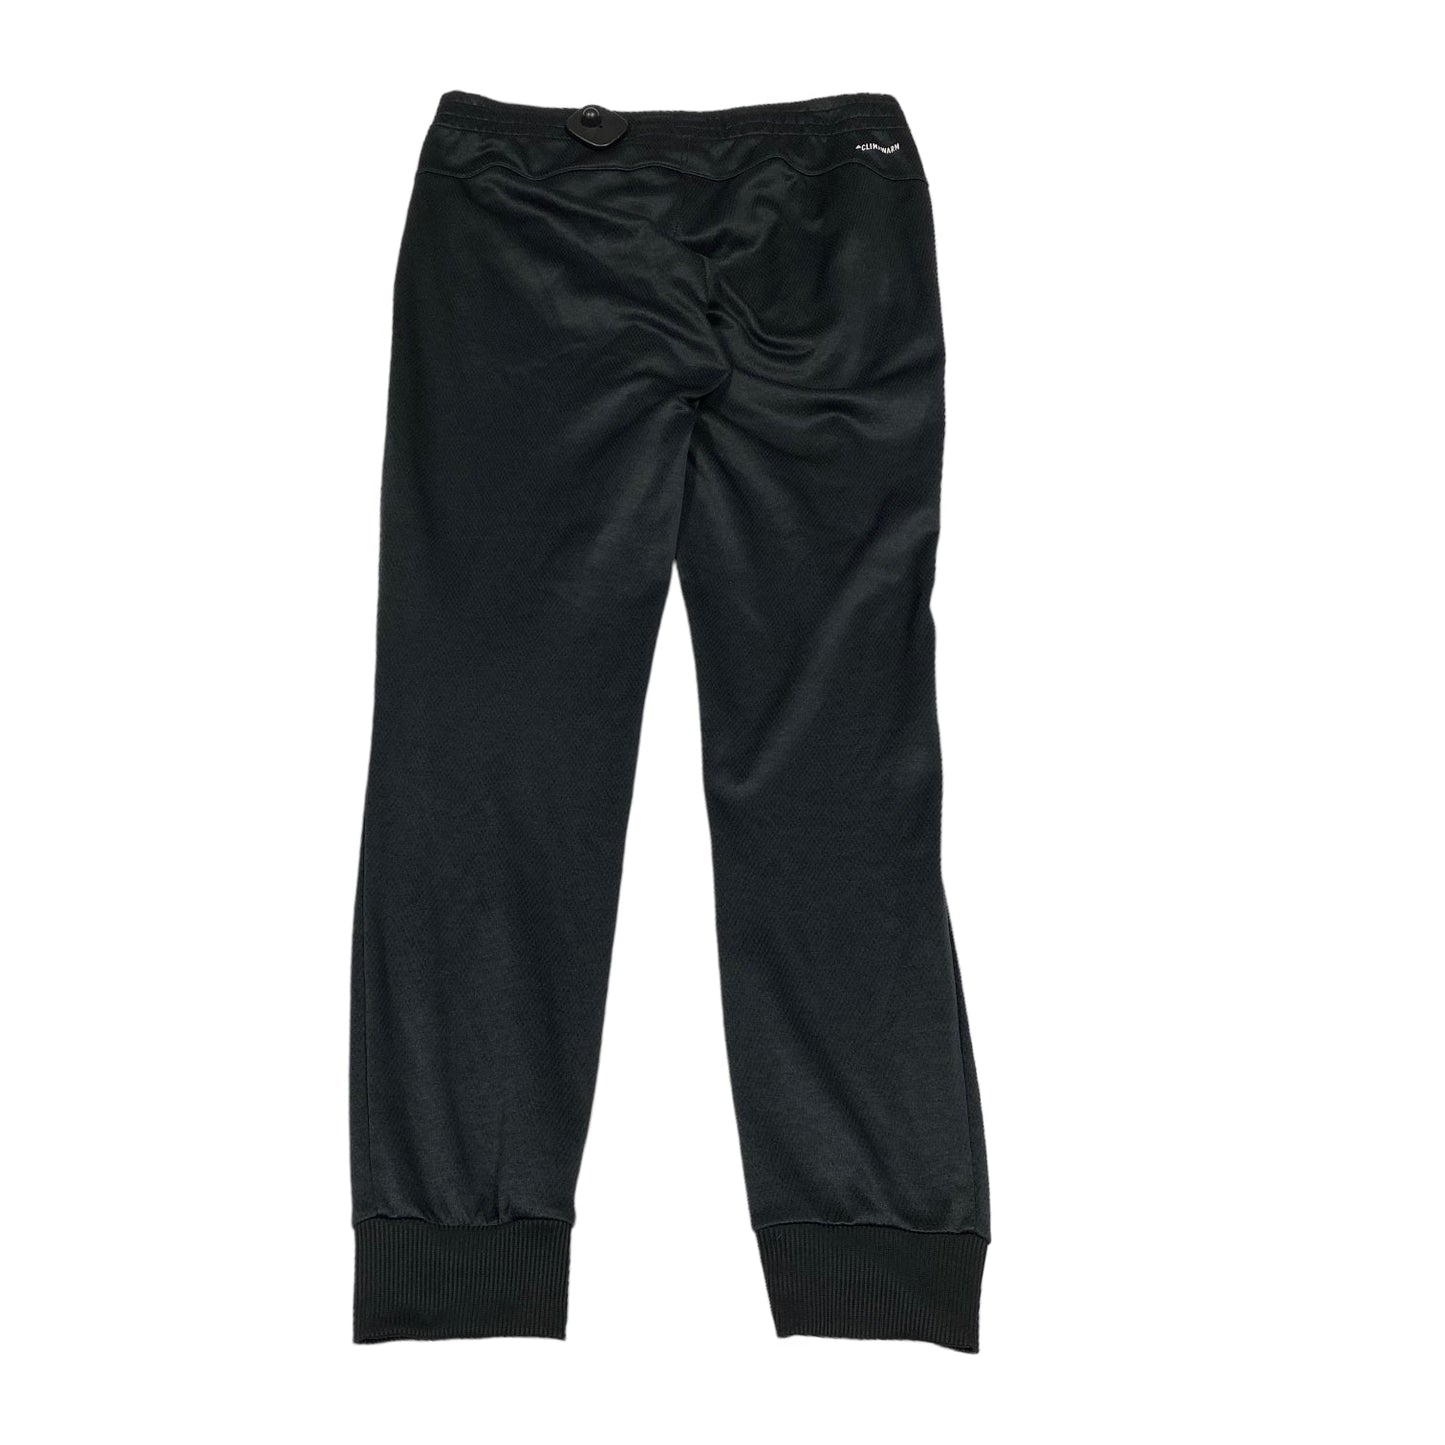 Athletic Pants By Adidas  Size: M